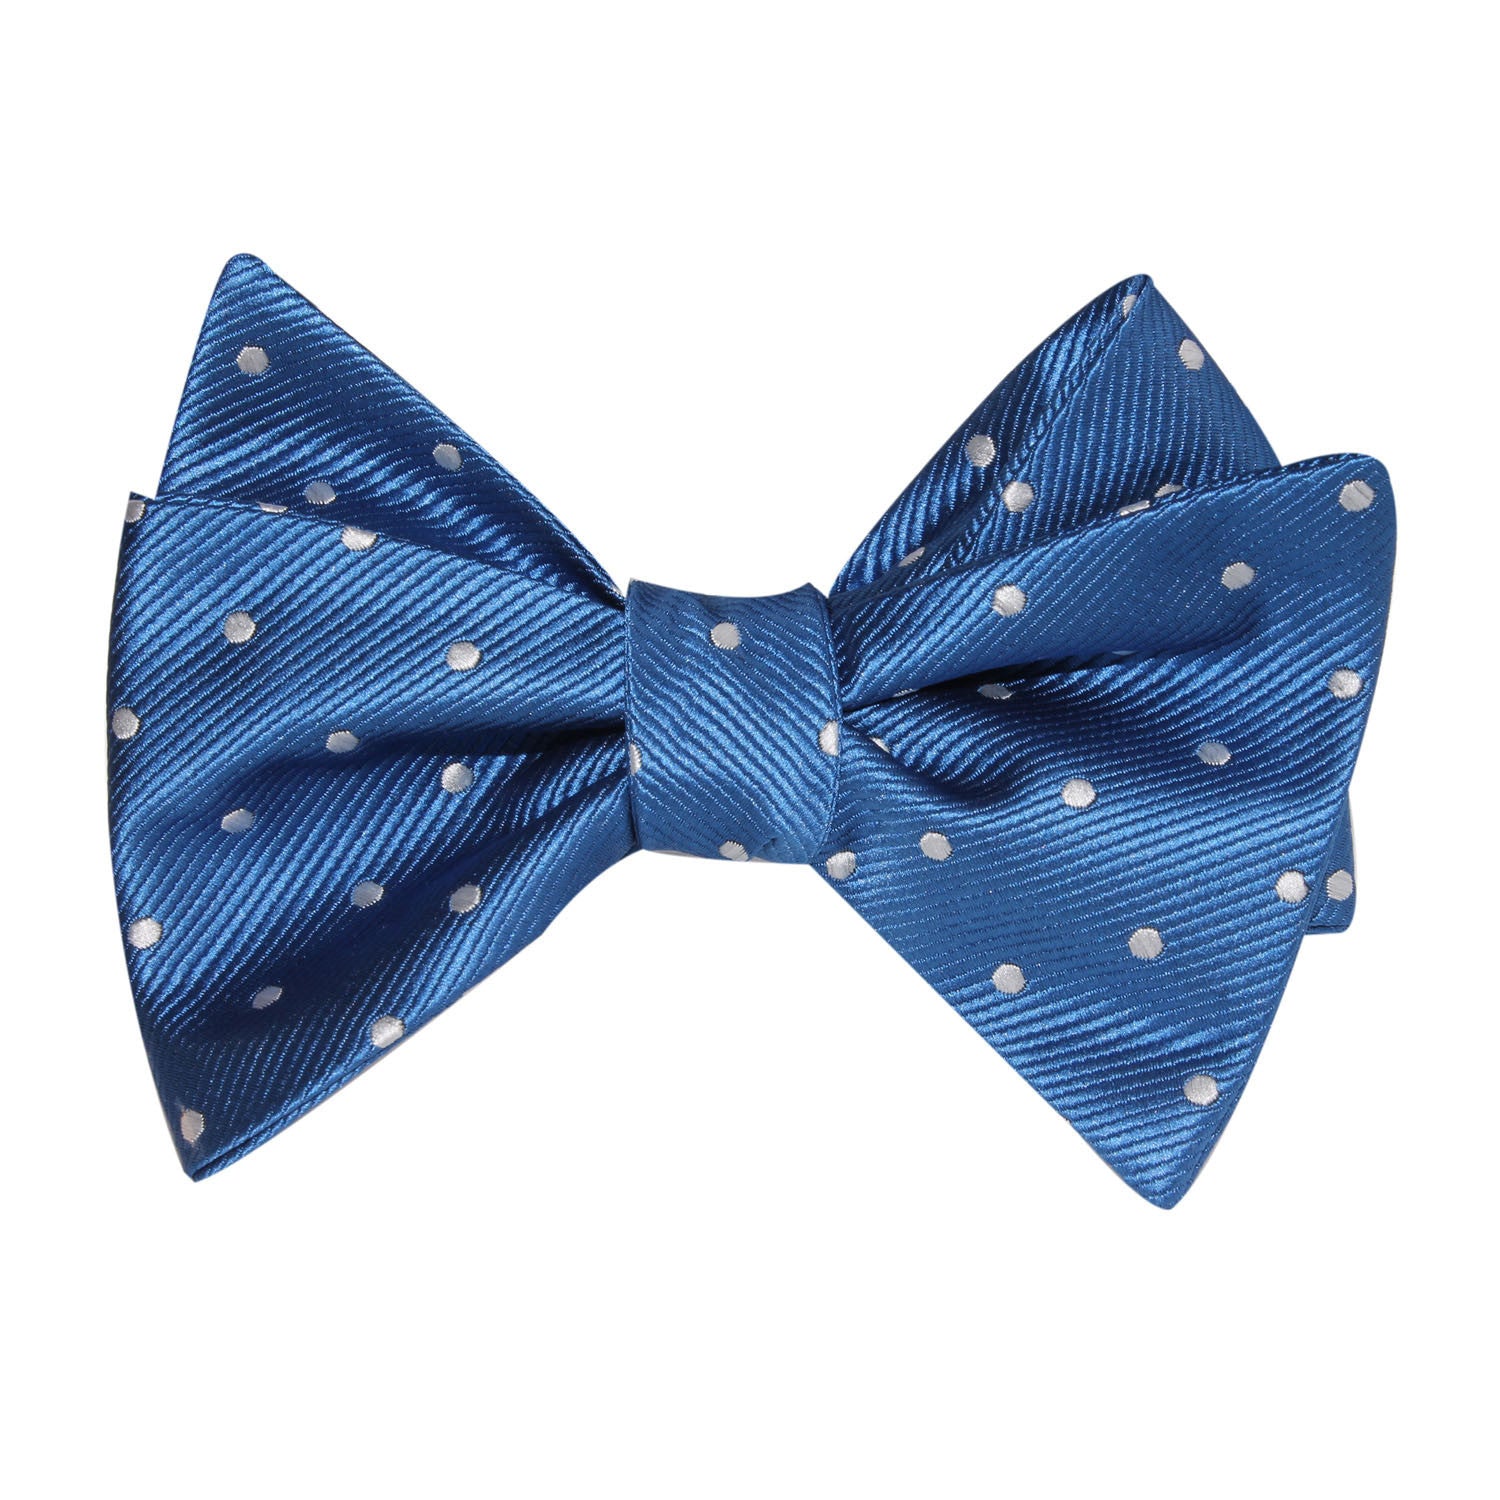 Royal Blue with White Polka Dots Self Tie Bow Tie 1